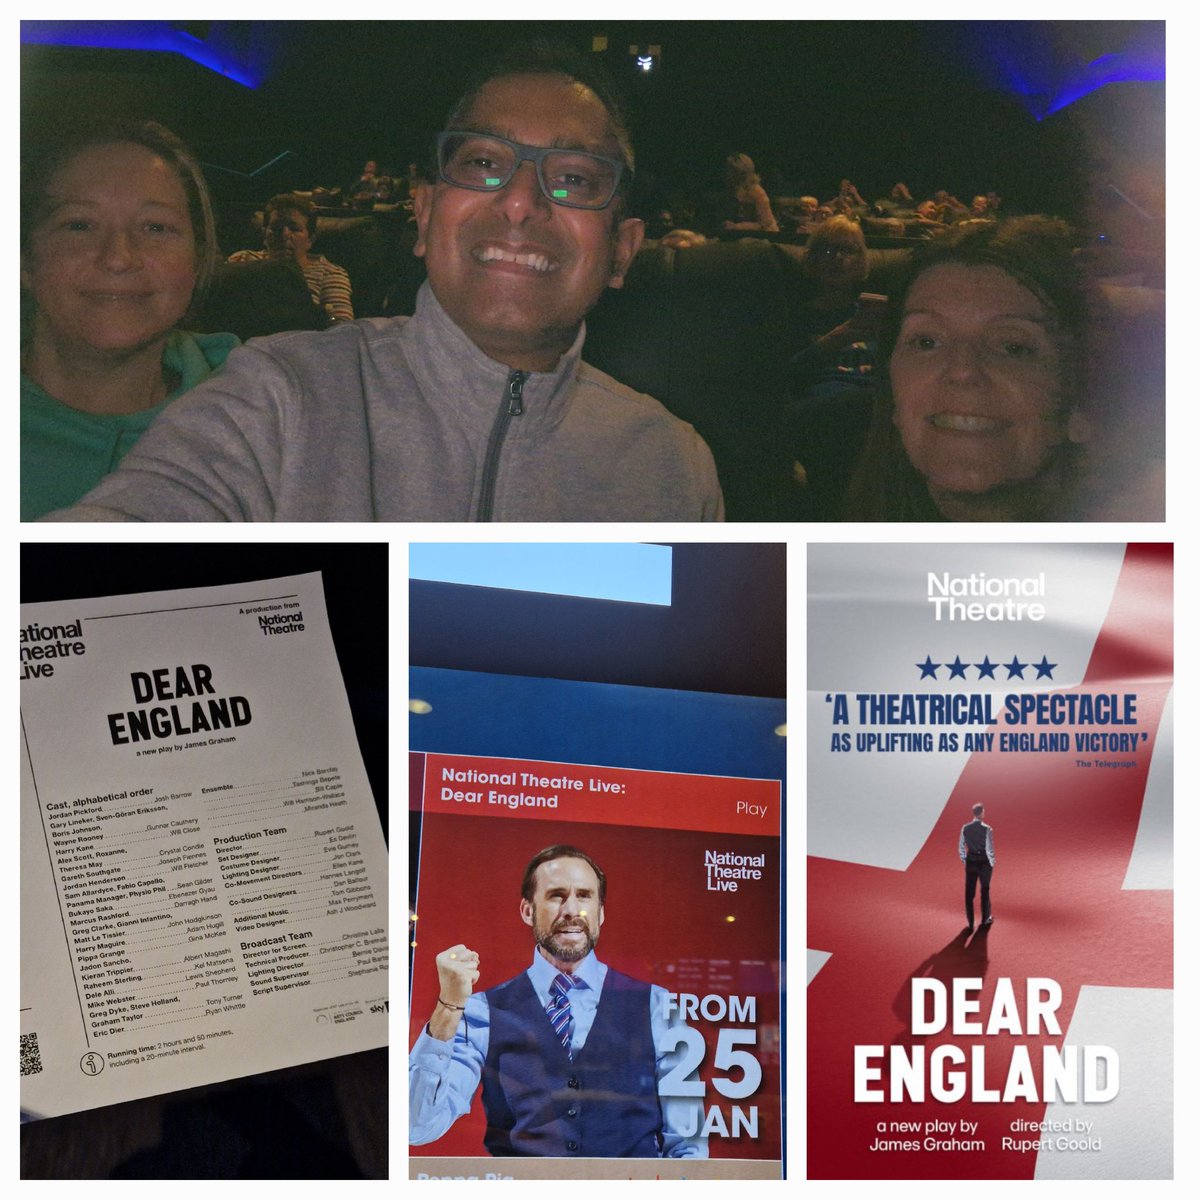 #DearEngland was fabulous! Well done @NTLive and @mrJamesGraham 👏⚽️